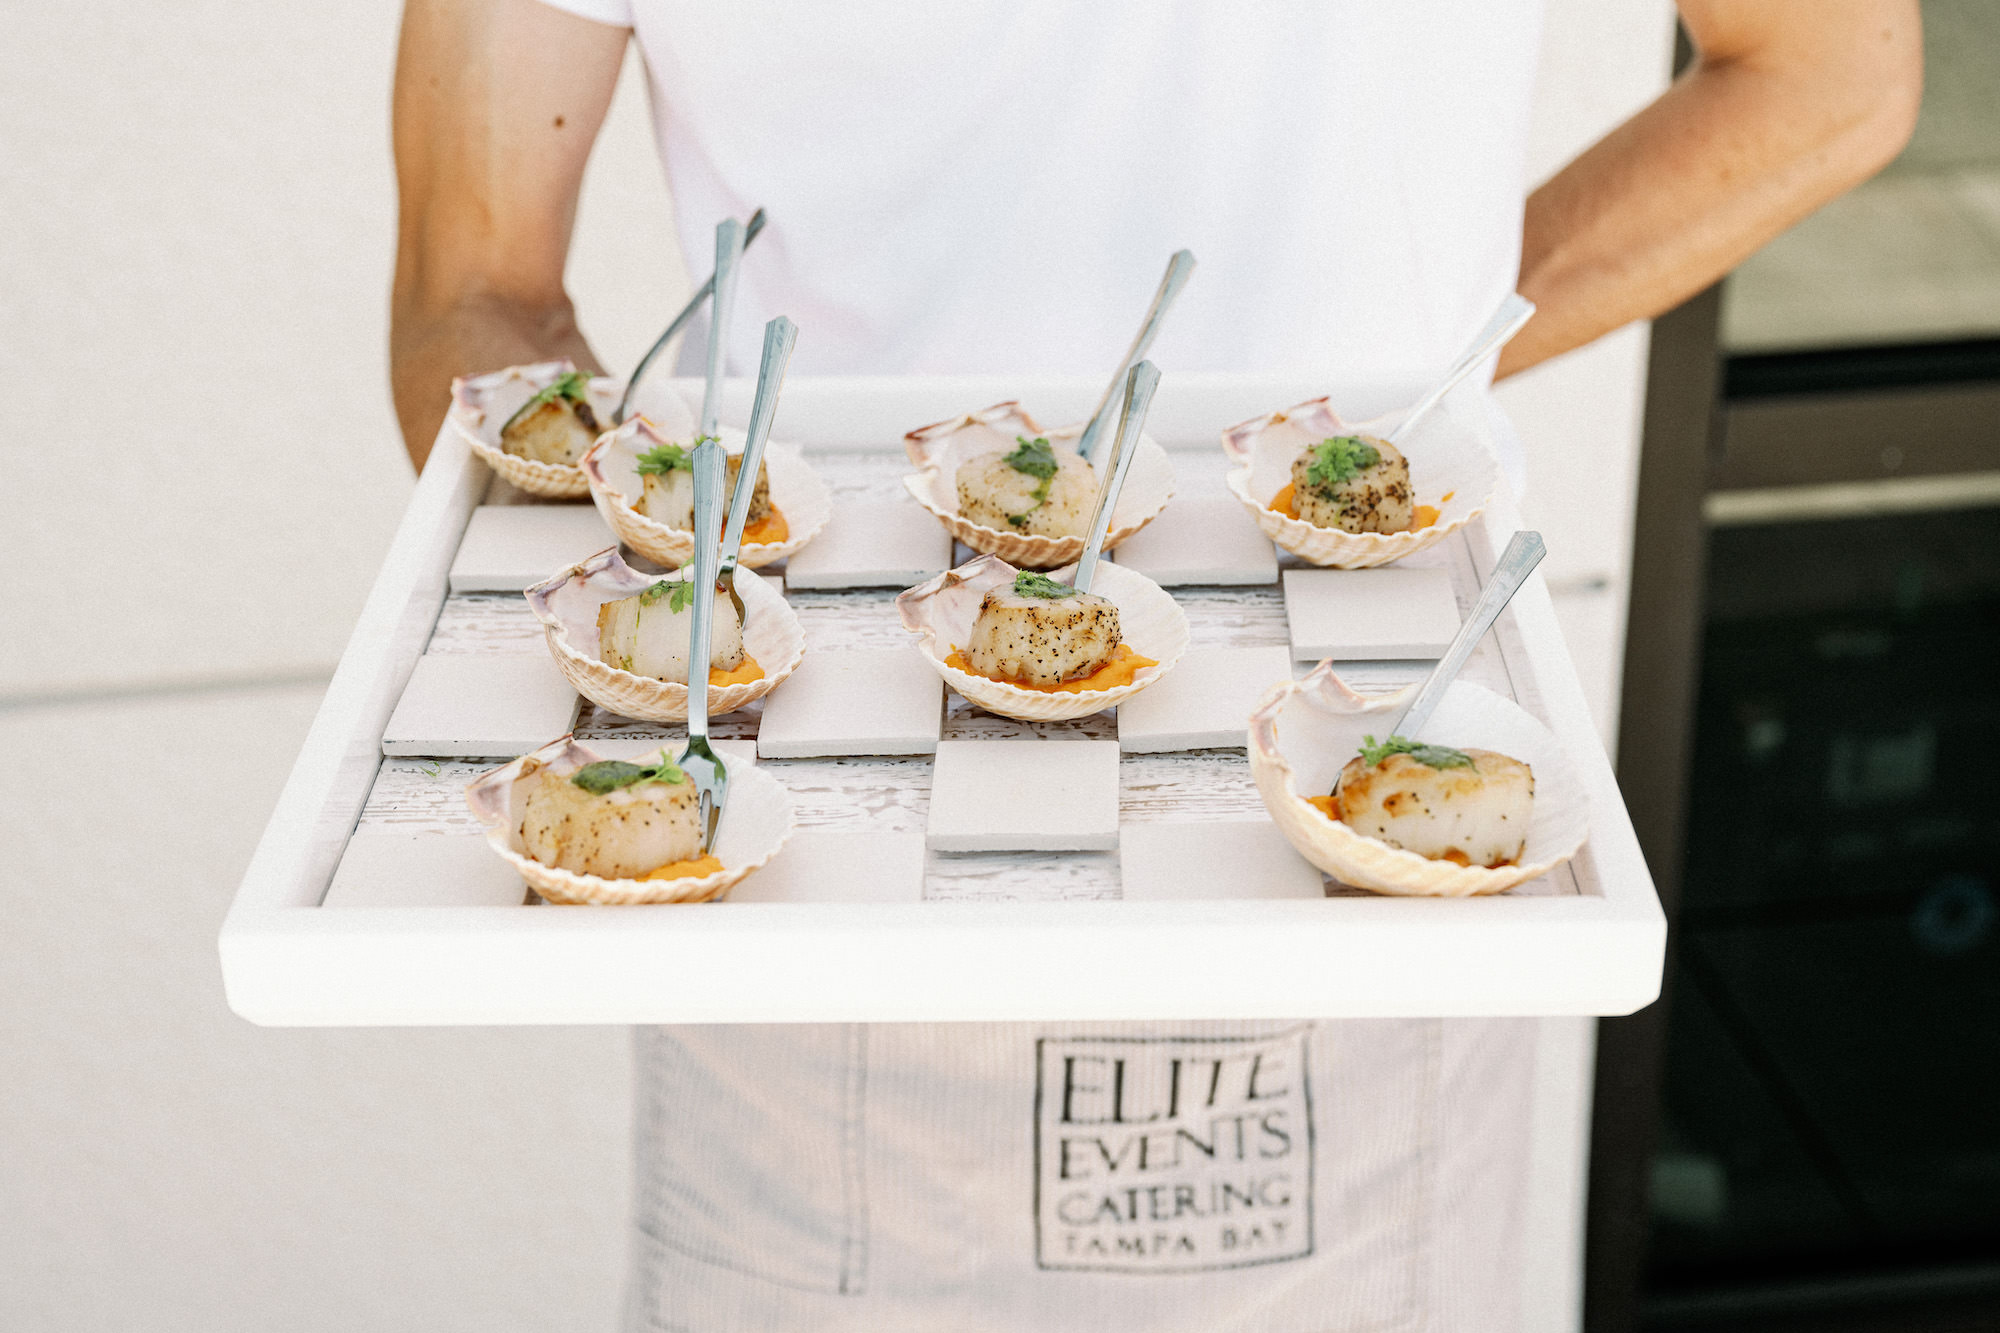 Tampa Bay Catering Company Elite Events Catering | Dewitt for Love Photography | Pan Seared Sea Scallops over Sweet Potato Puree with Herb Oil, served in Scallop Shell